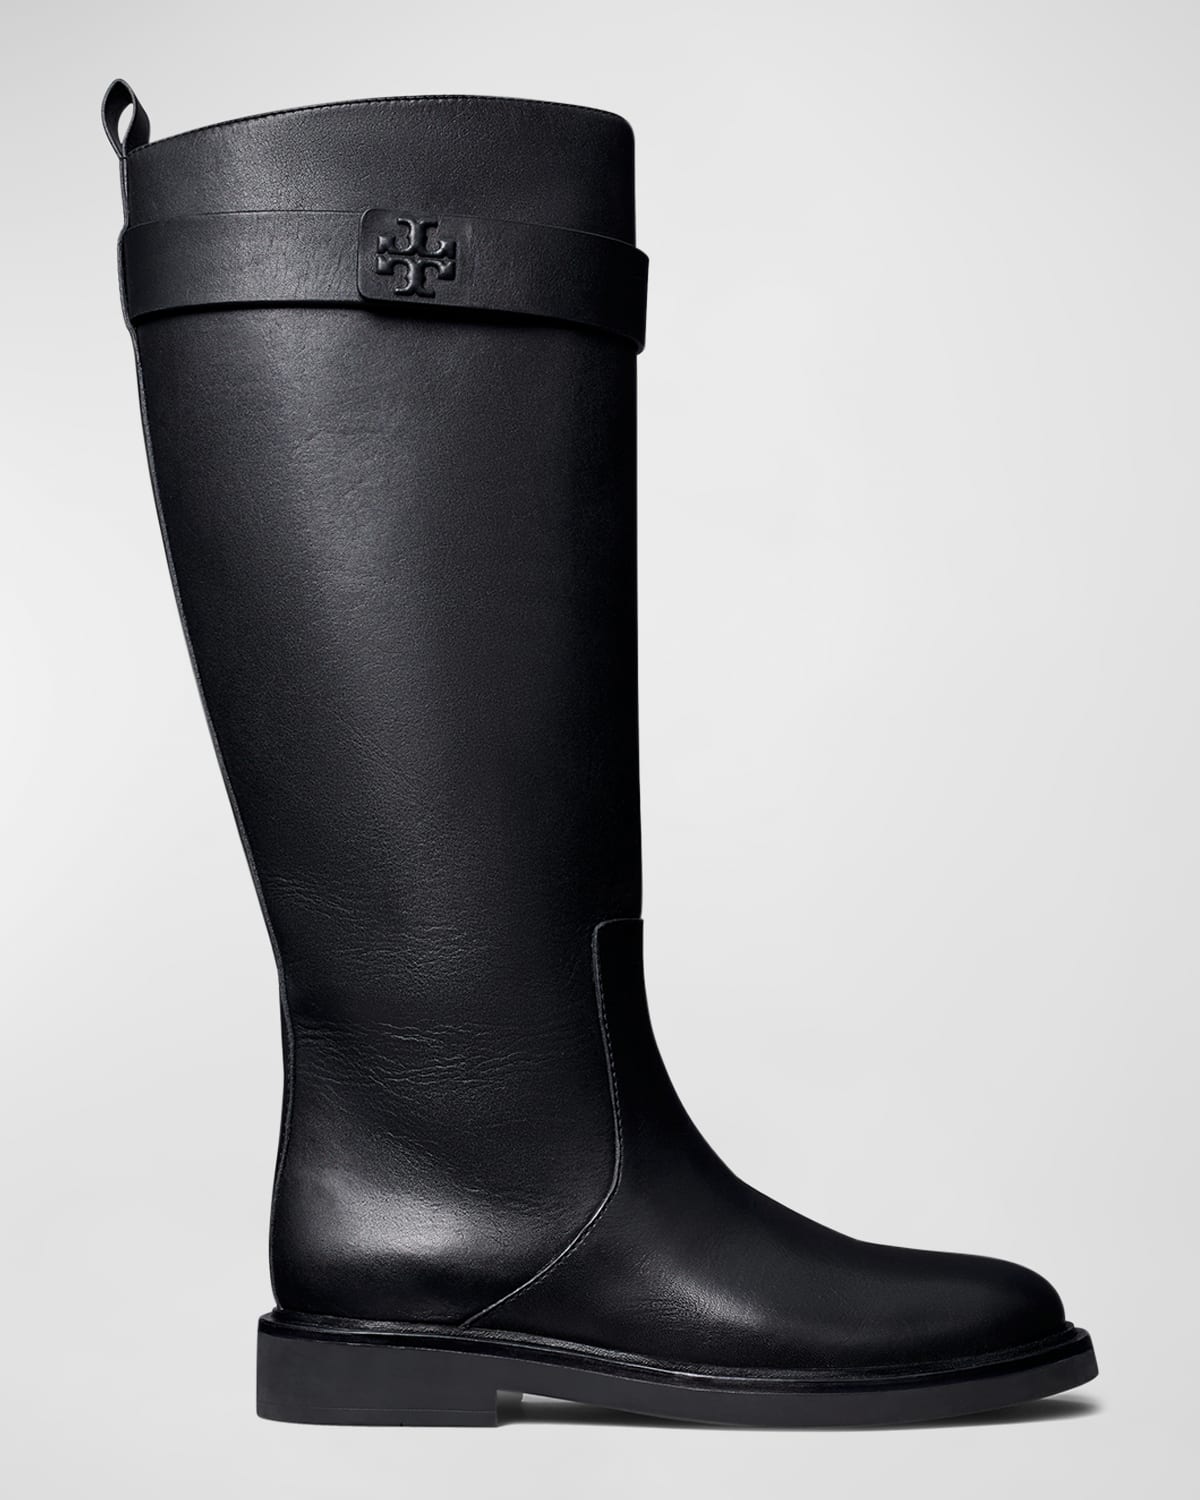 TORY BURCH DOUBLE T LEATHER TALL UTILITY BOOTS